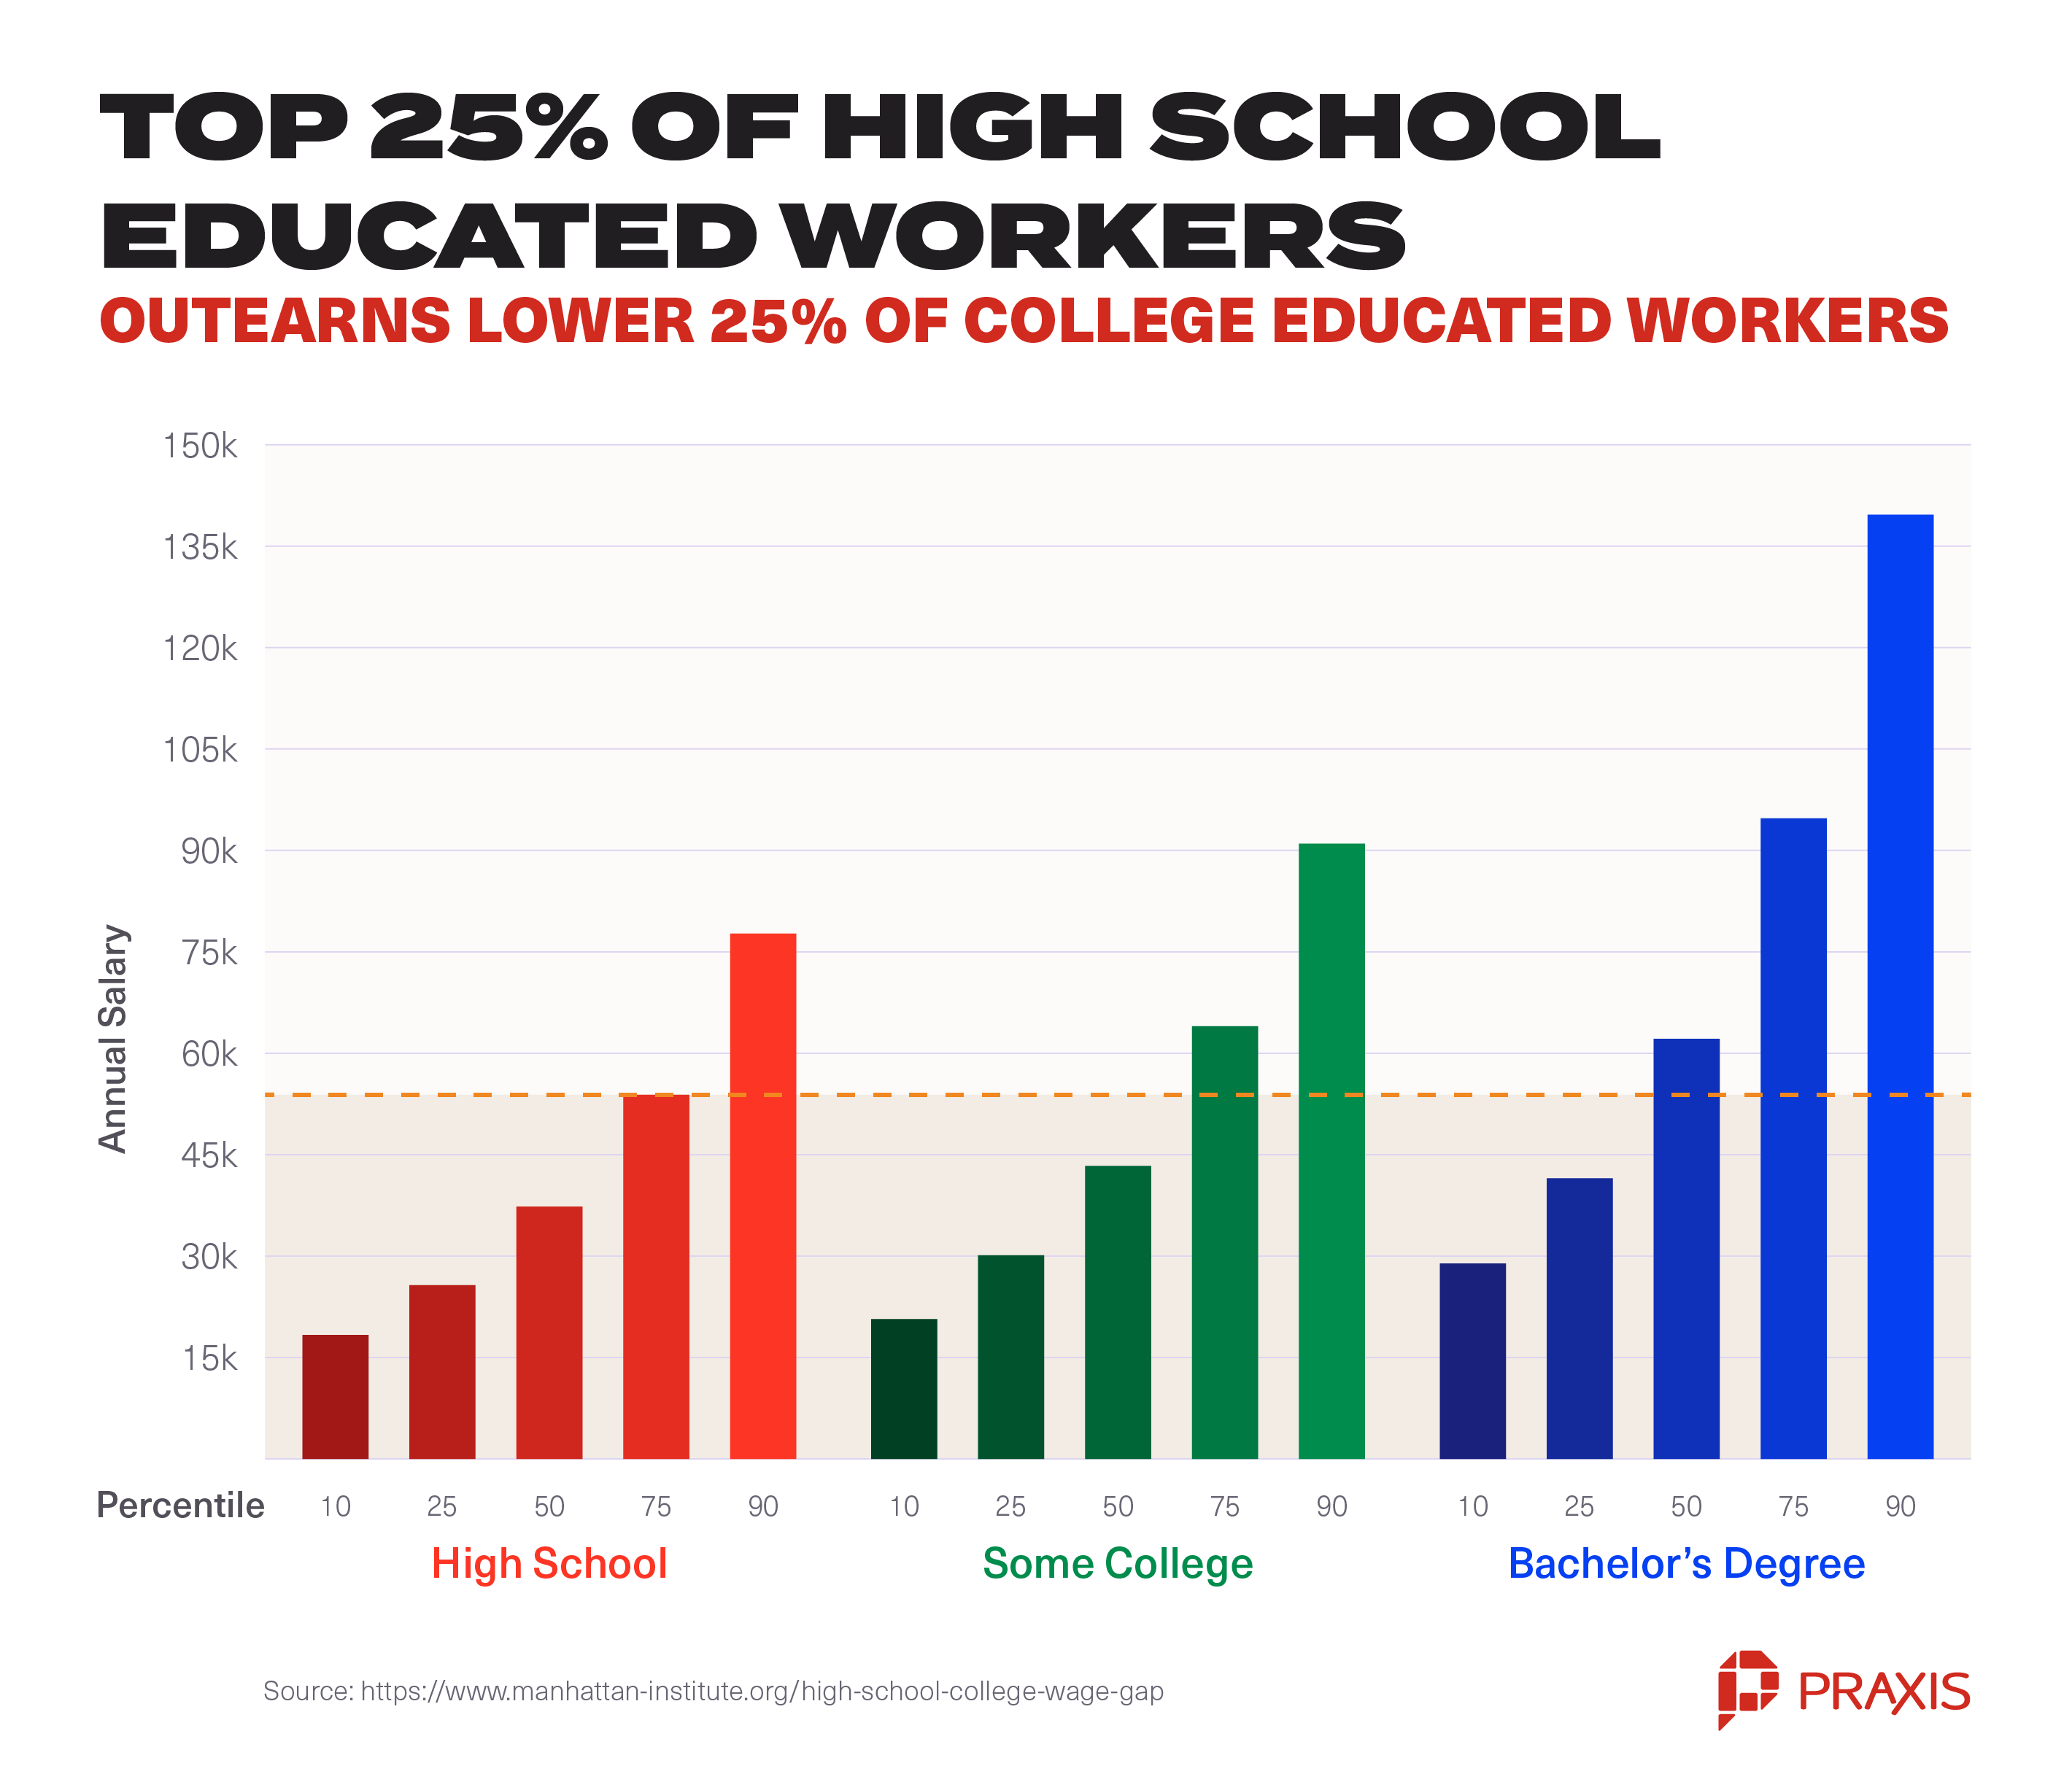 25% of high school educated workers outearn college workers